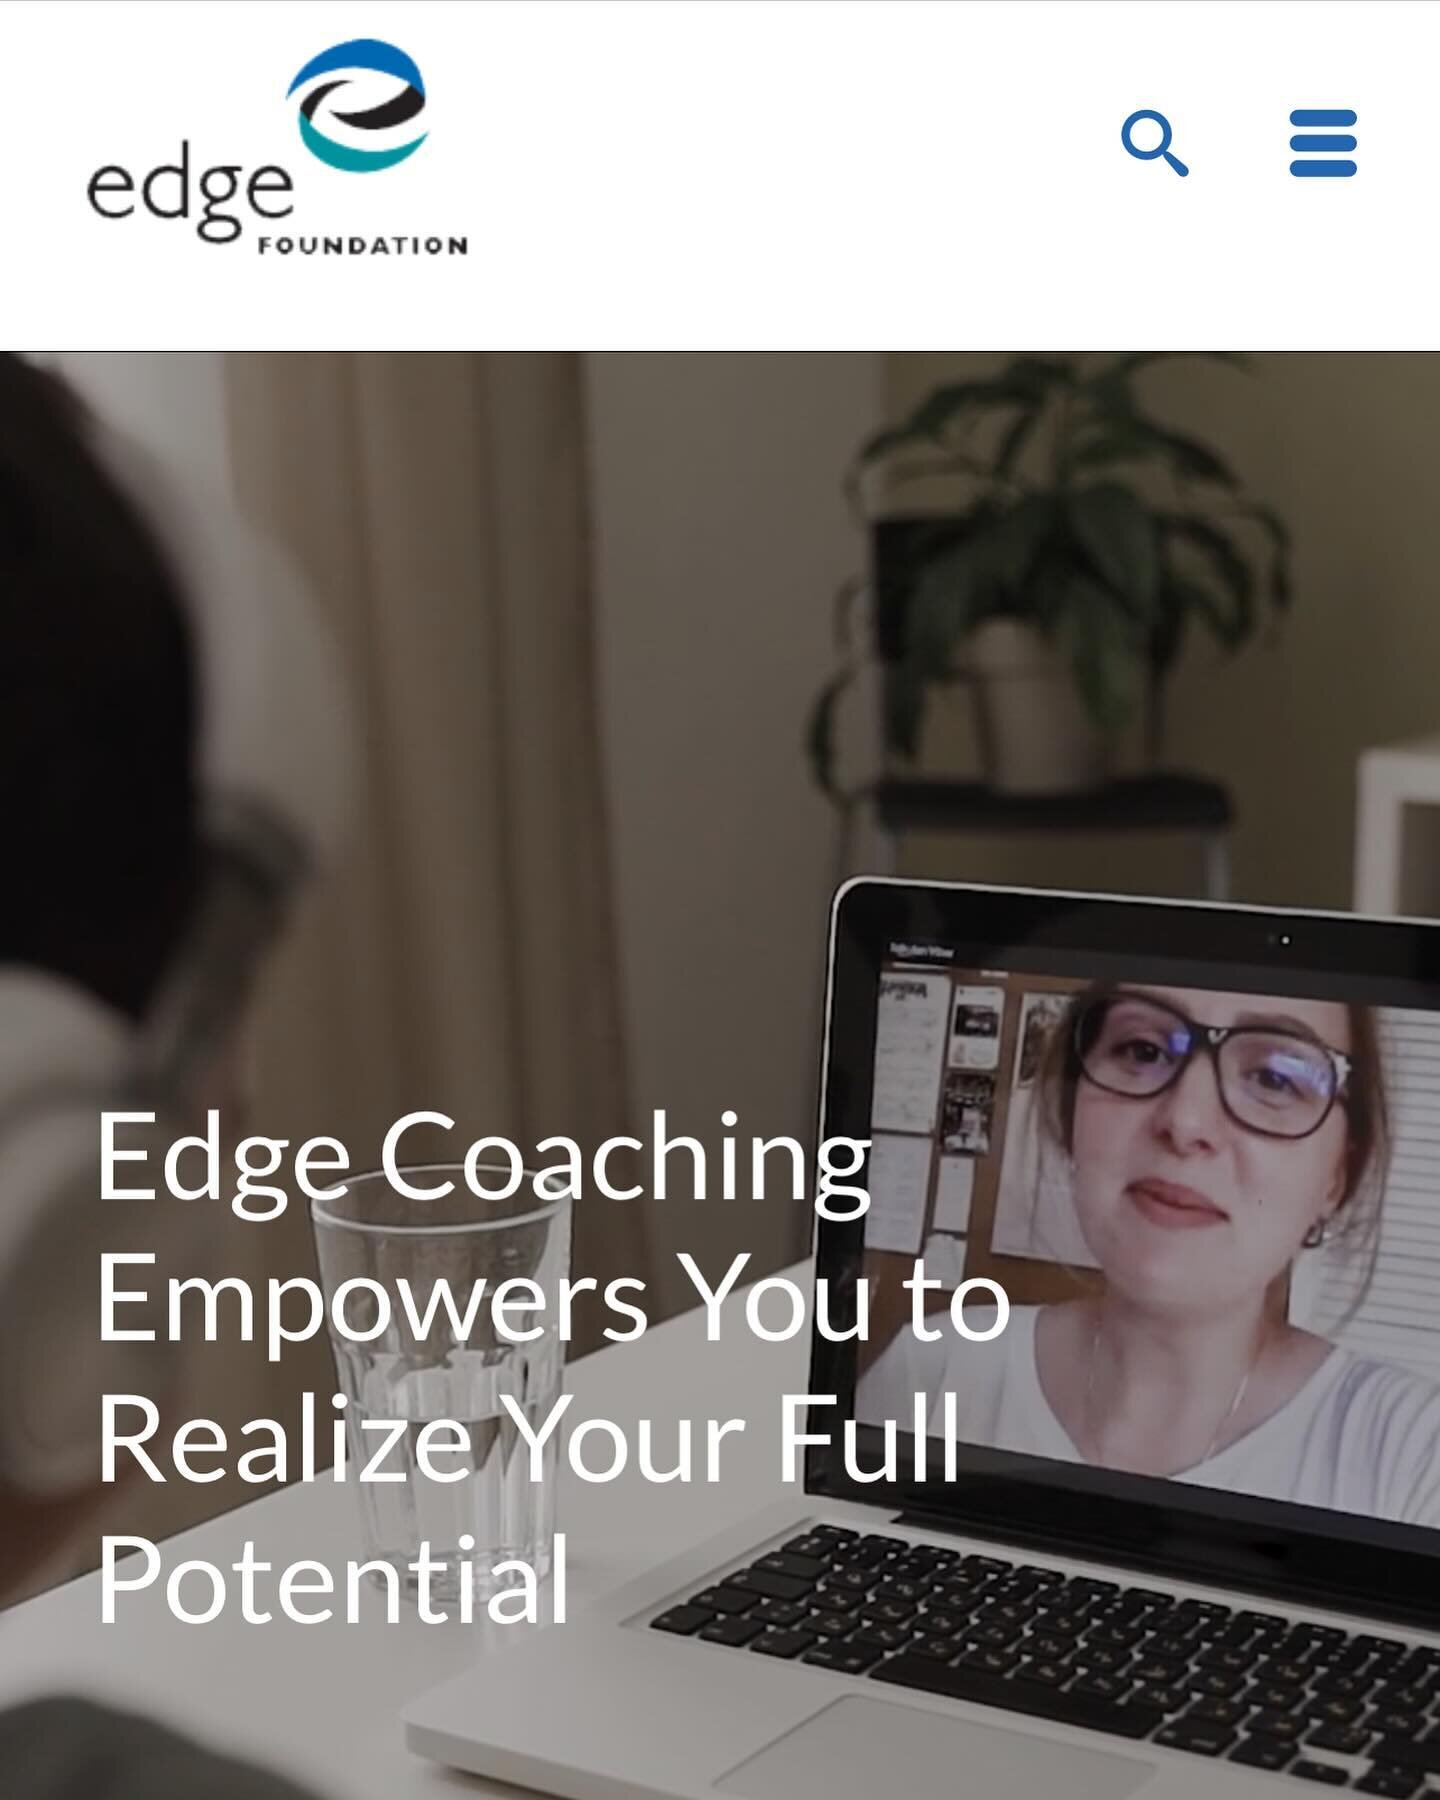 I&rsquo;m excited to announce my new partnership with the @edge_foundation, the organization with the most experience and verified success in coaching people with ADHD and other learning challenges.  I&rsquo;m now an officially vetted Edge ADHD Acade